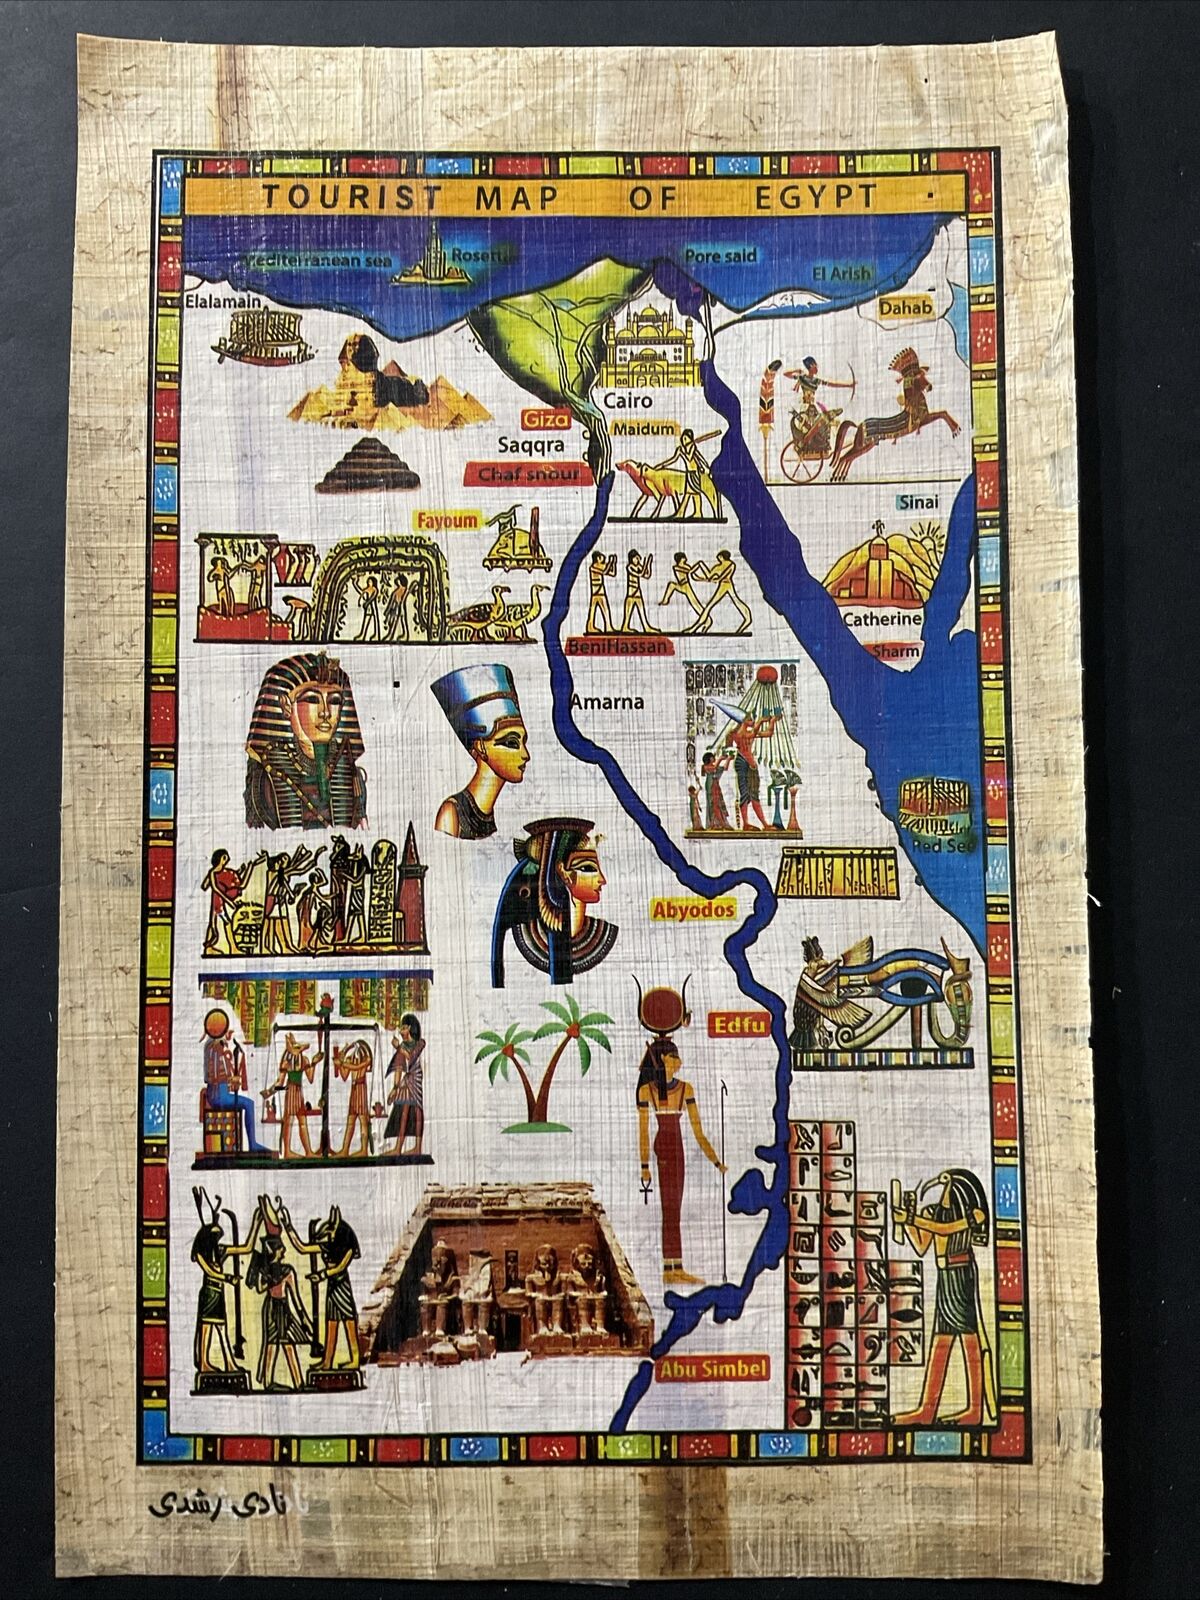 Rare Authentic Handmade Egyptian Papyrus-Map of the Nile Treasures 8x12”